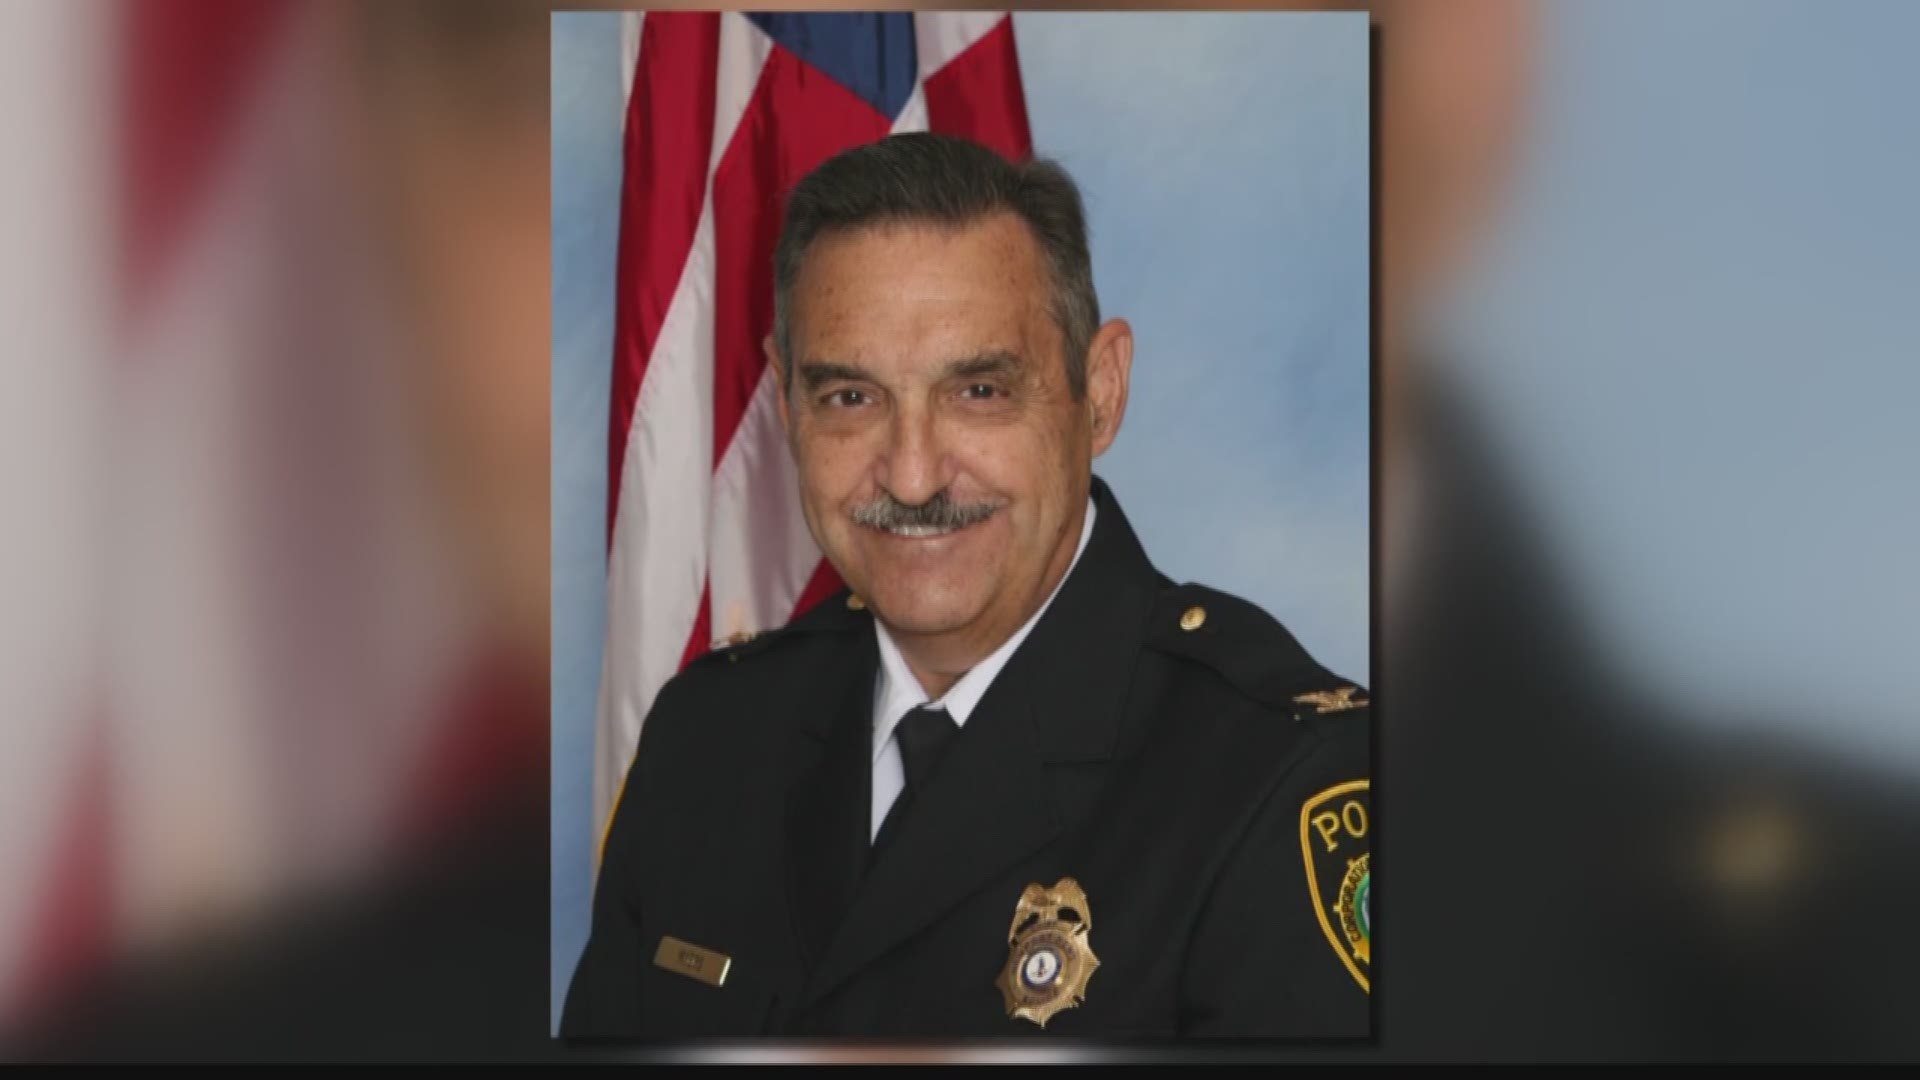 The head of the Newport News Police Department is leaving. Chief Richard Myers announced Tuesday he is stepping down come September 1st.